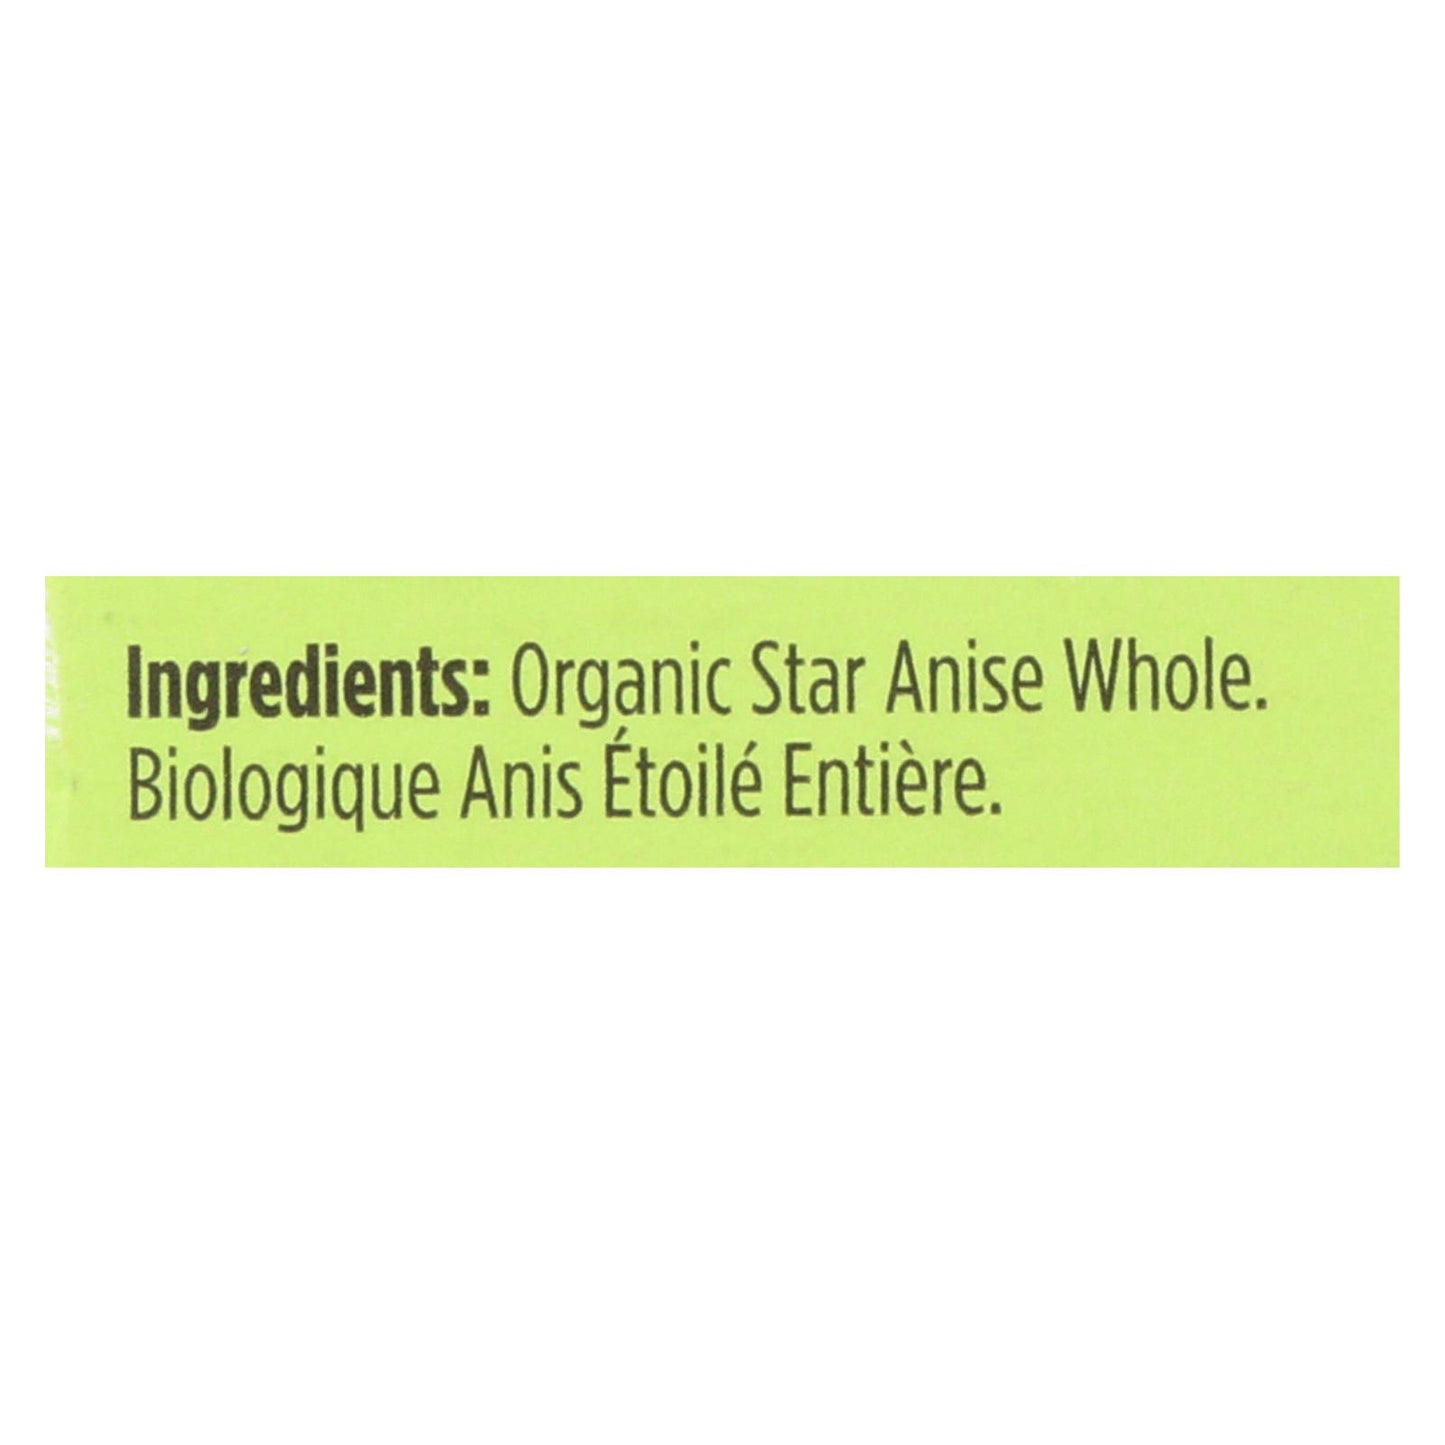 Spicely Organics - Organic Star Anise - Whole - Case Of 6 - 0.1 Oz.